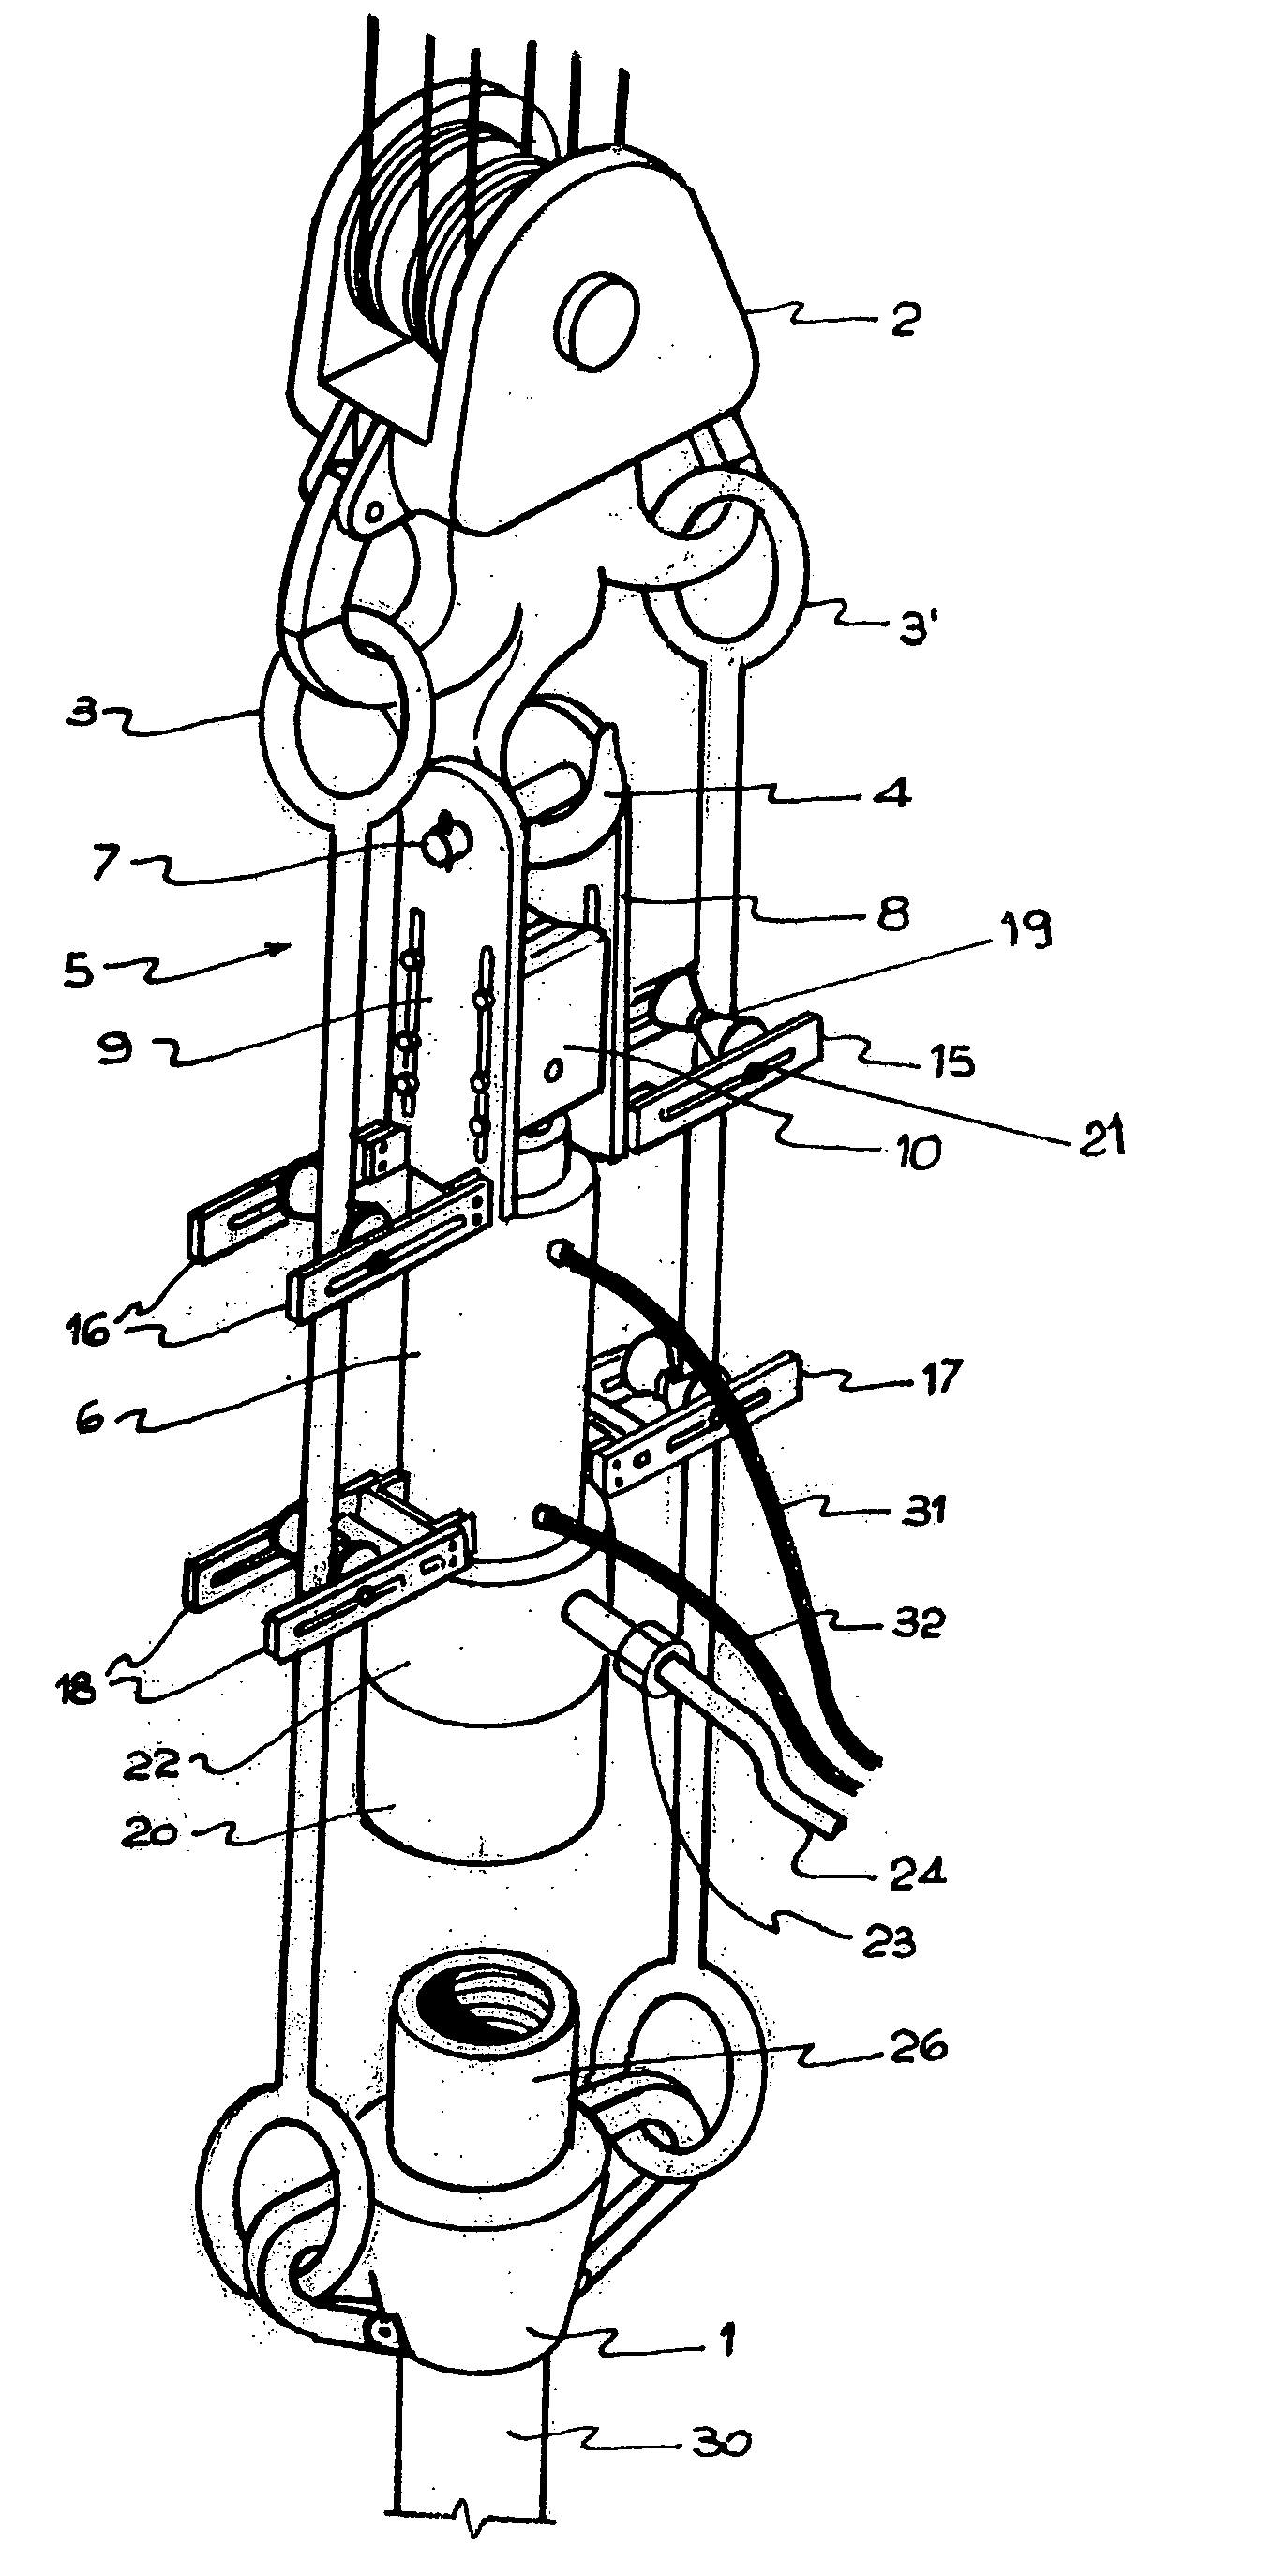 Tool for fluid filling and circulation during oilfield well tubing